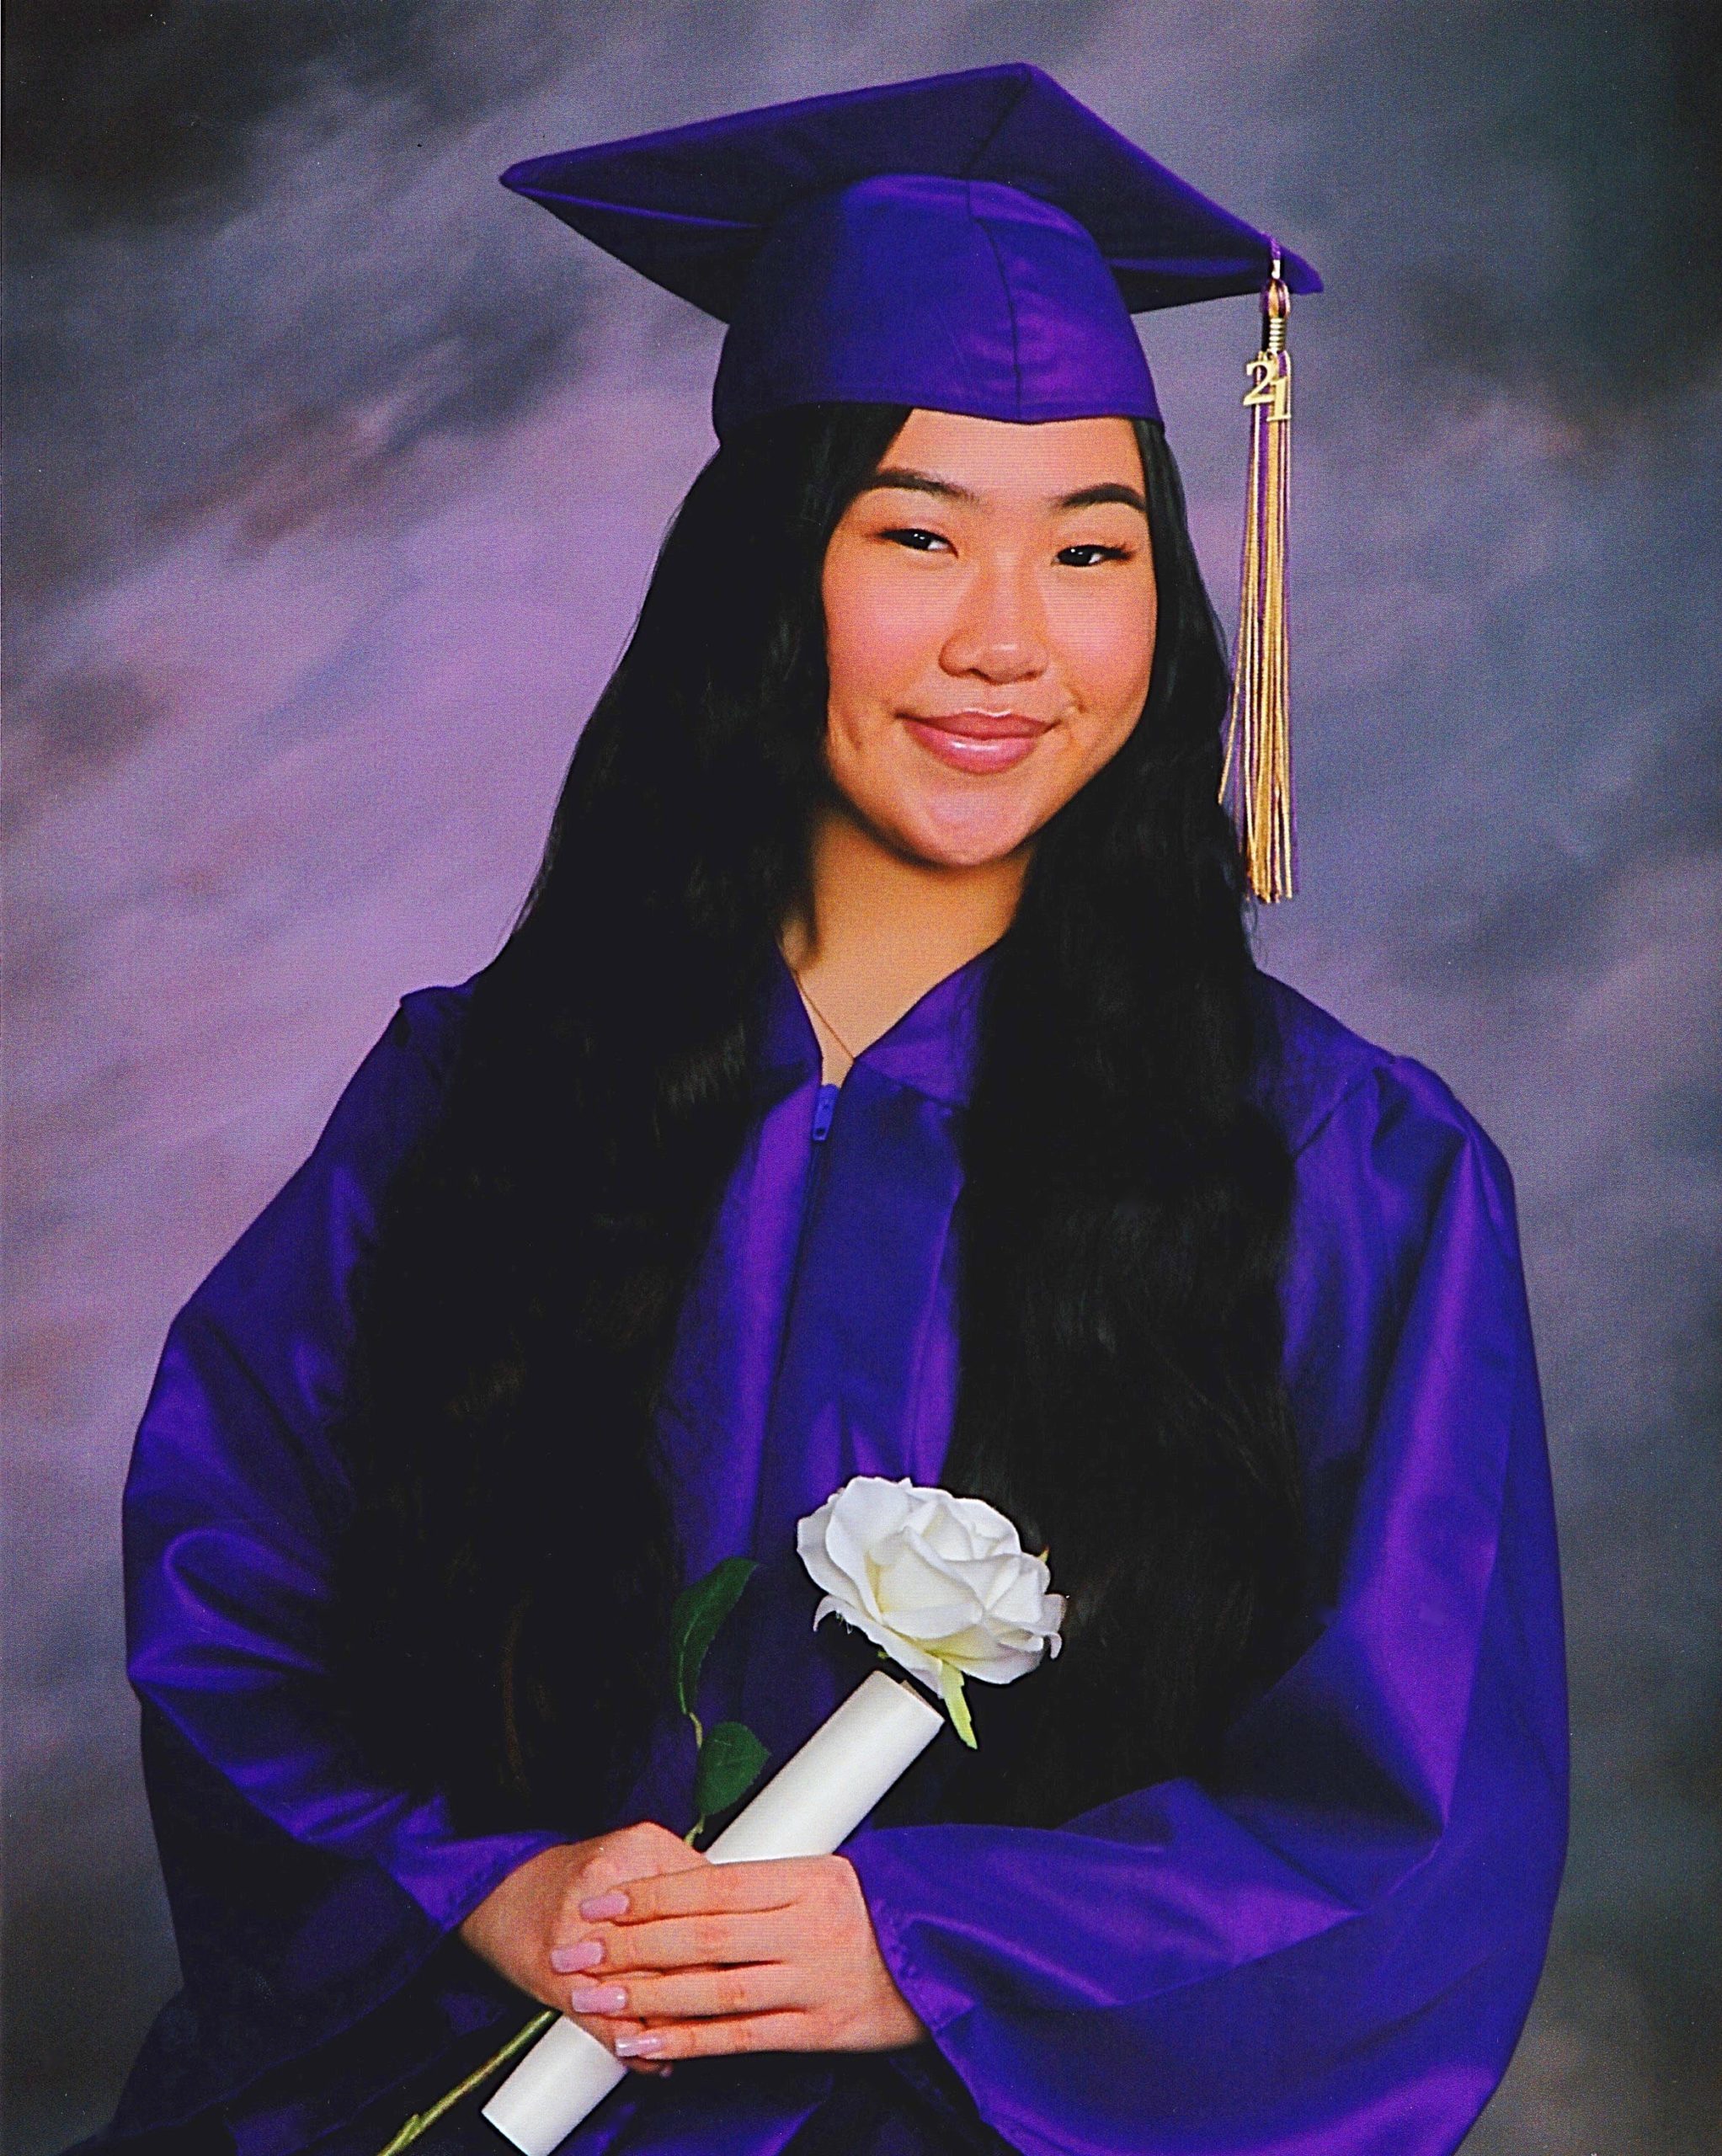 smiling girl wearing purple graduation cap and gown and holding white rose and rolled up diploma